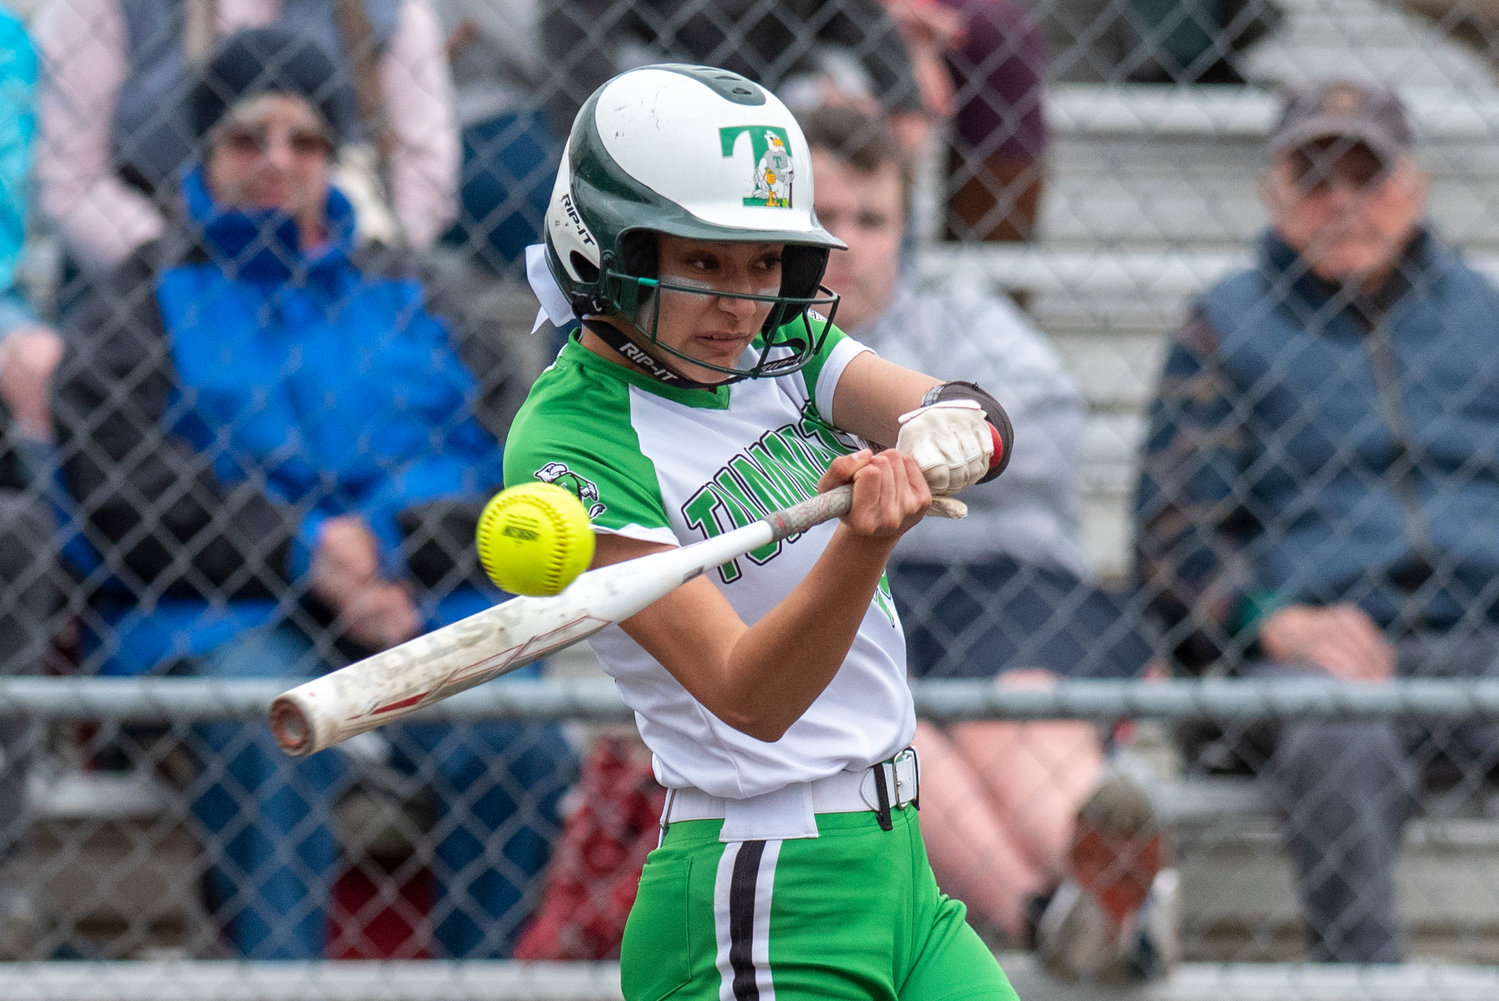 Tumwater's Jaylene Manriquez lines up a W.F. West pitch during a home game on May 2.